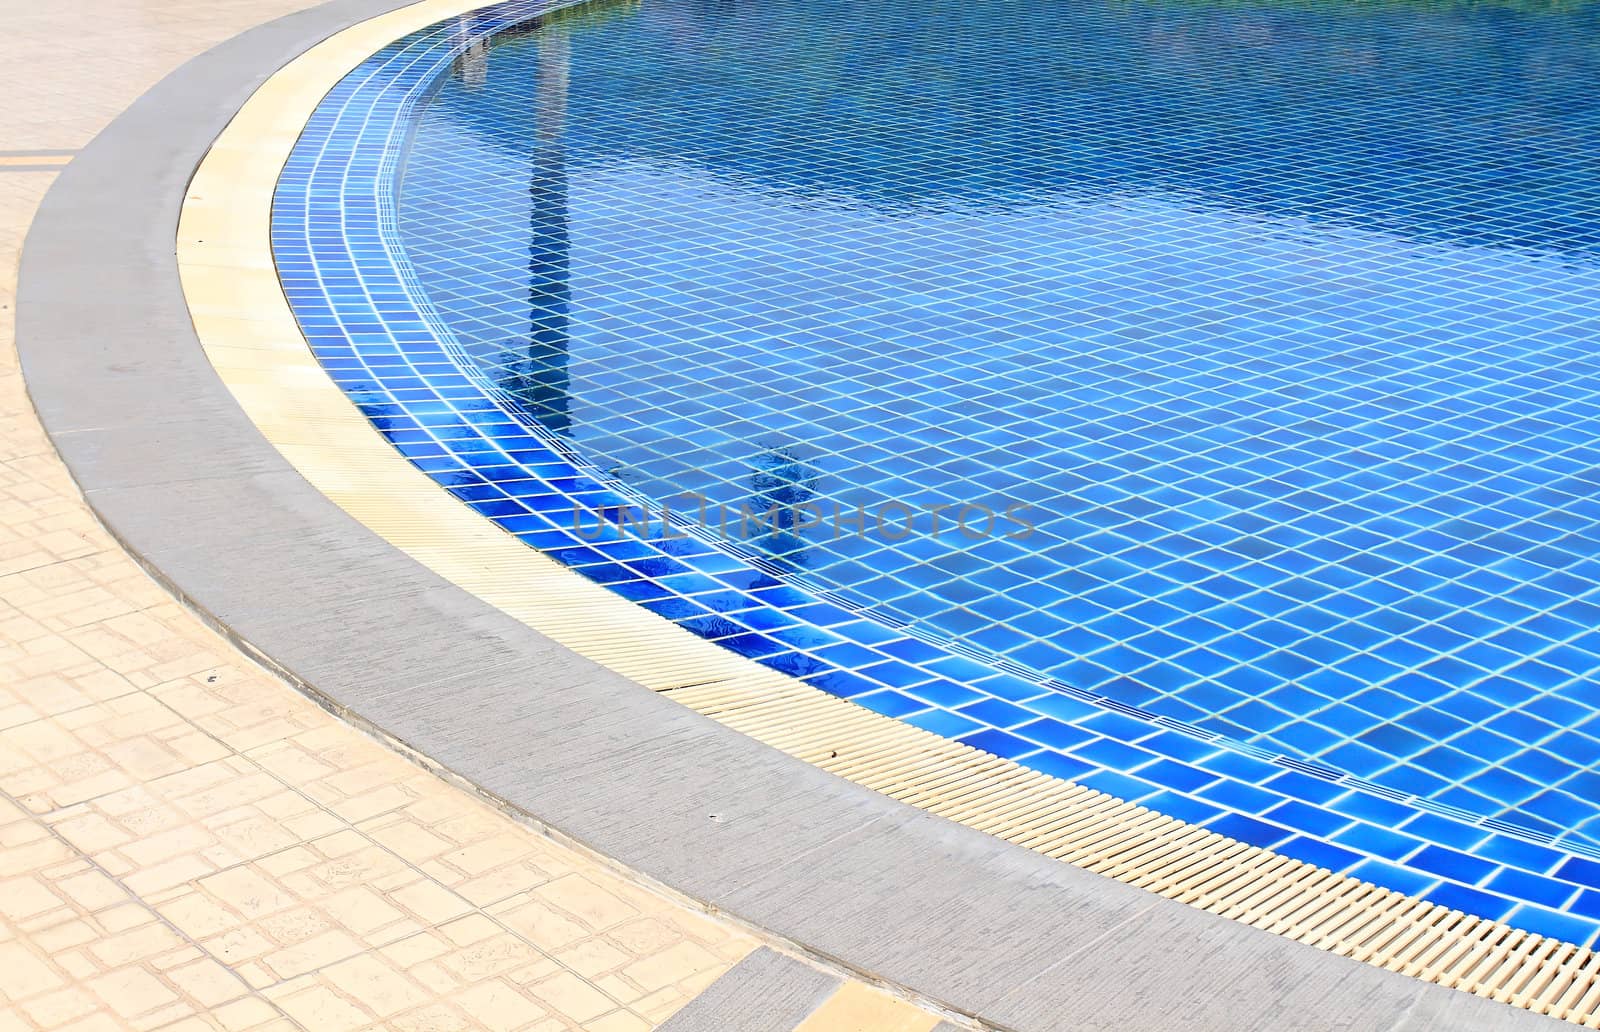 Swimming pool with stair at hotel close up